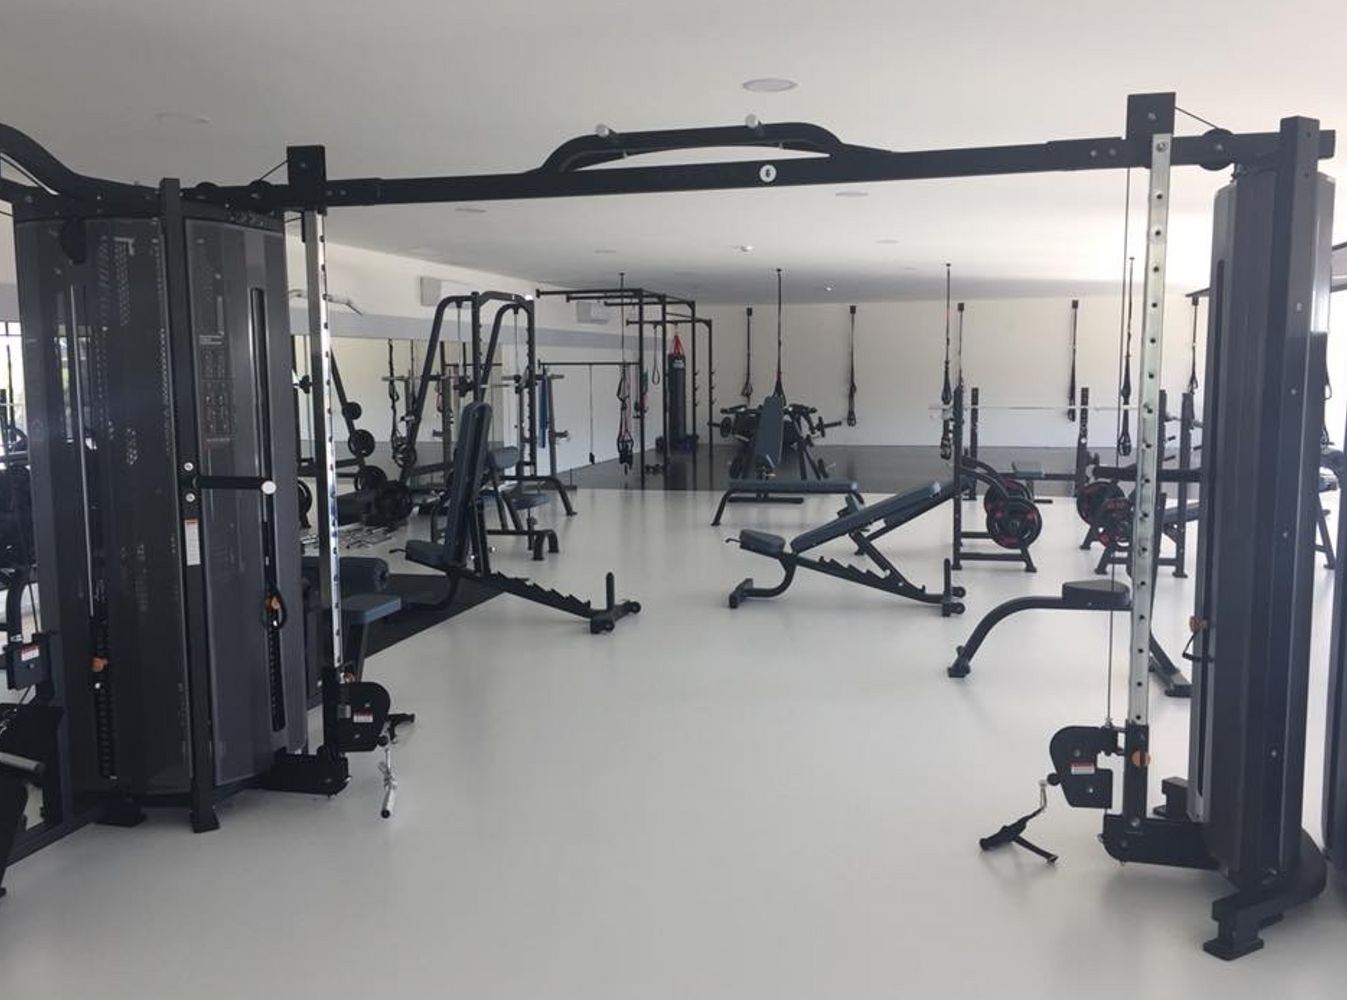 VO2 fitness gym in Barcelos, Portugal